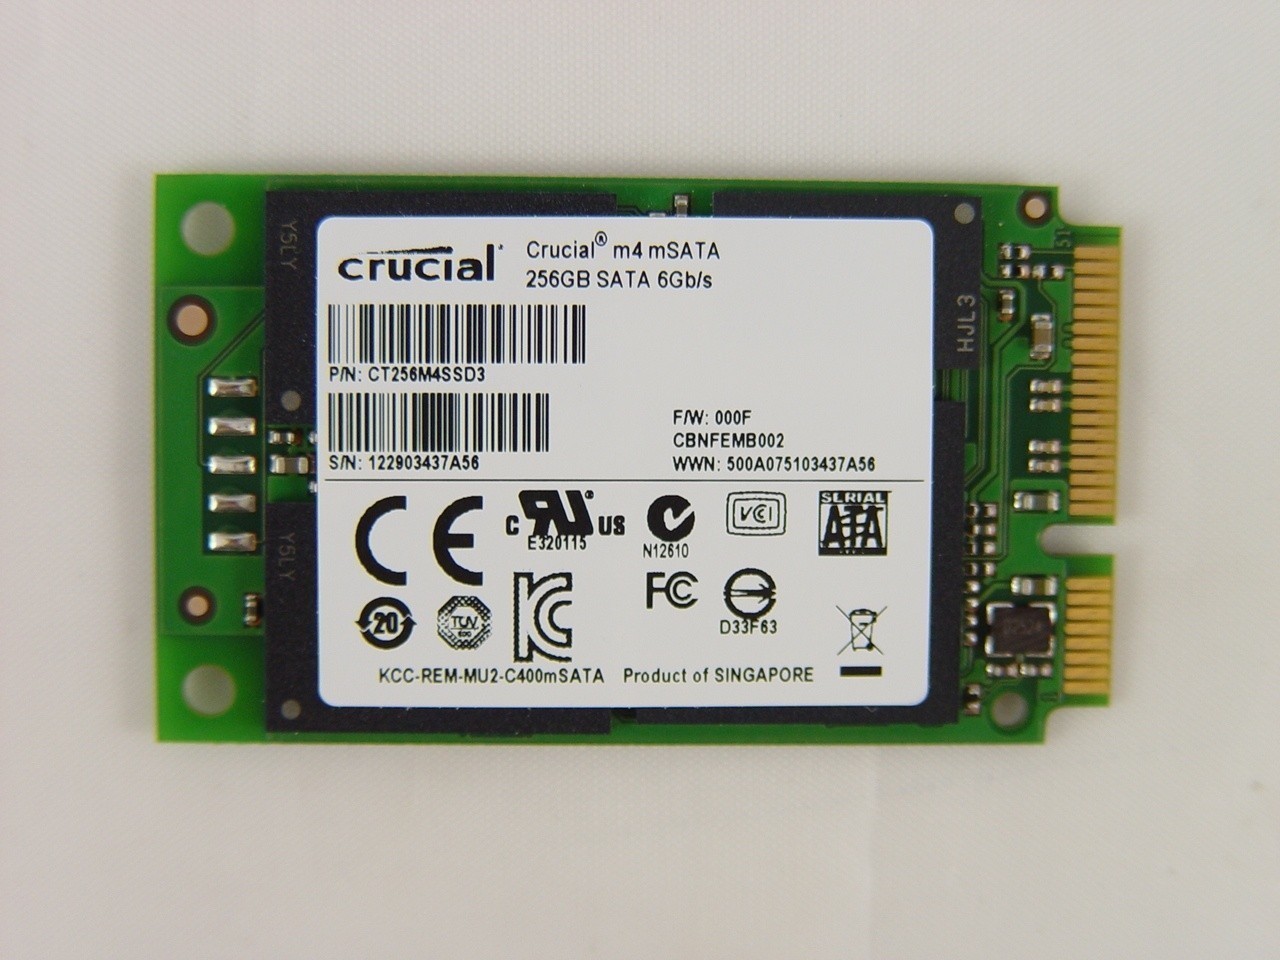 Crucial m4 mSATA 256GB Solid State Drive Review